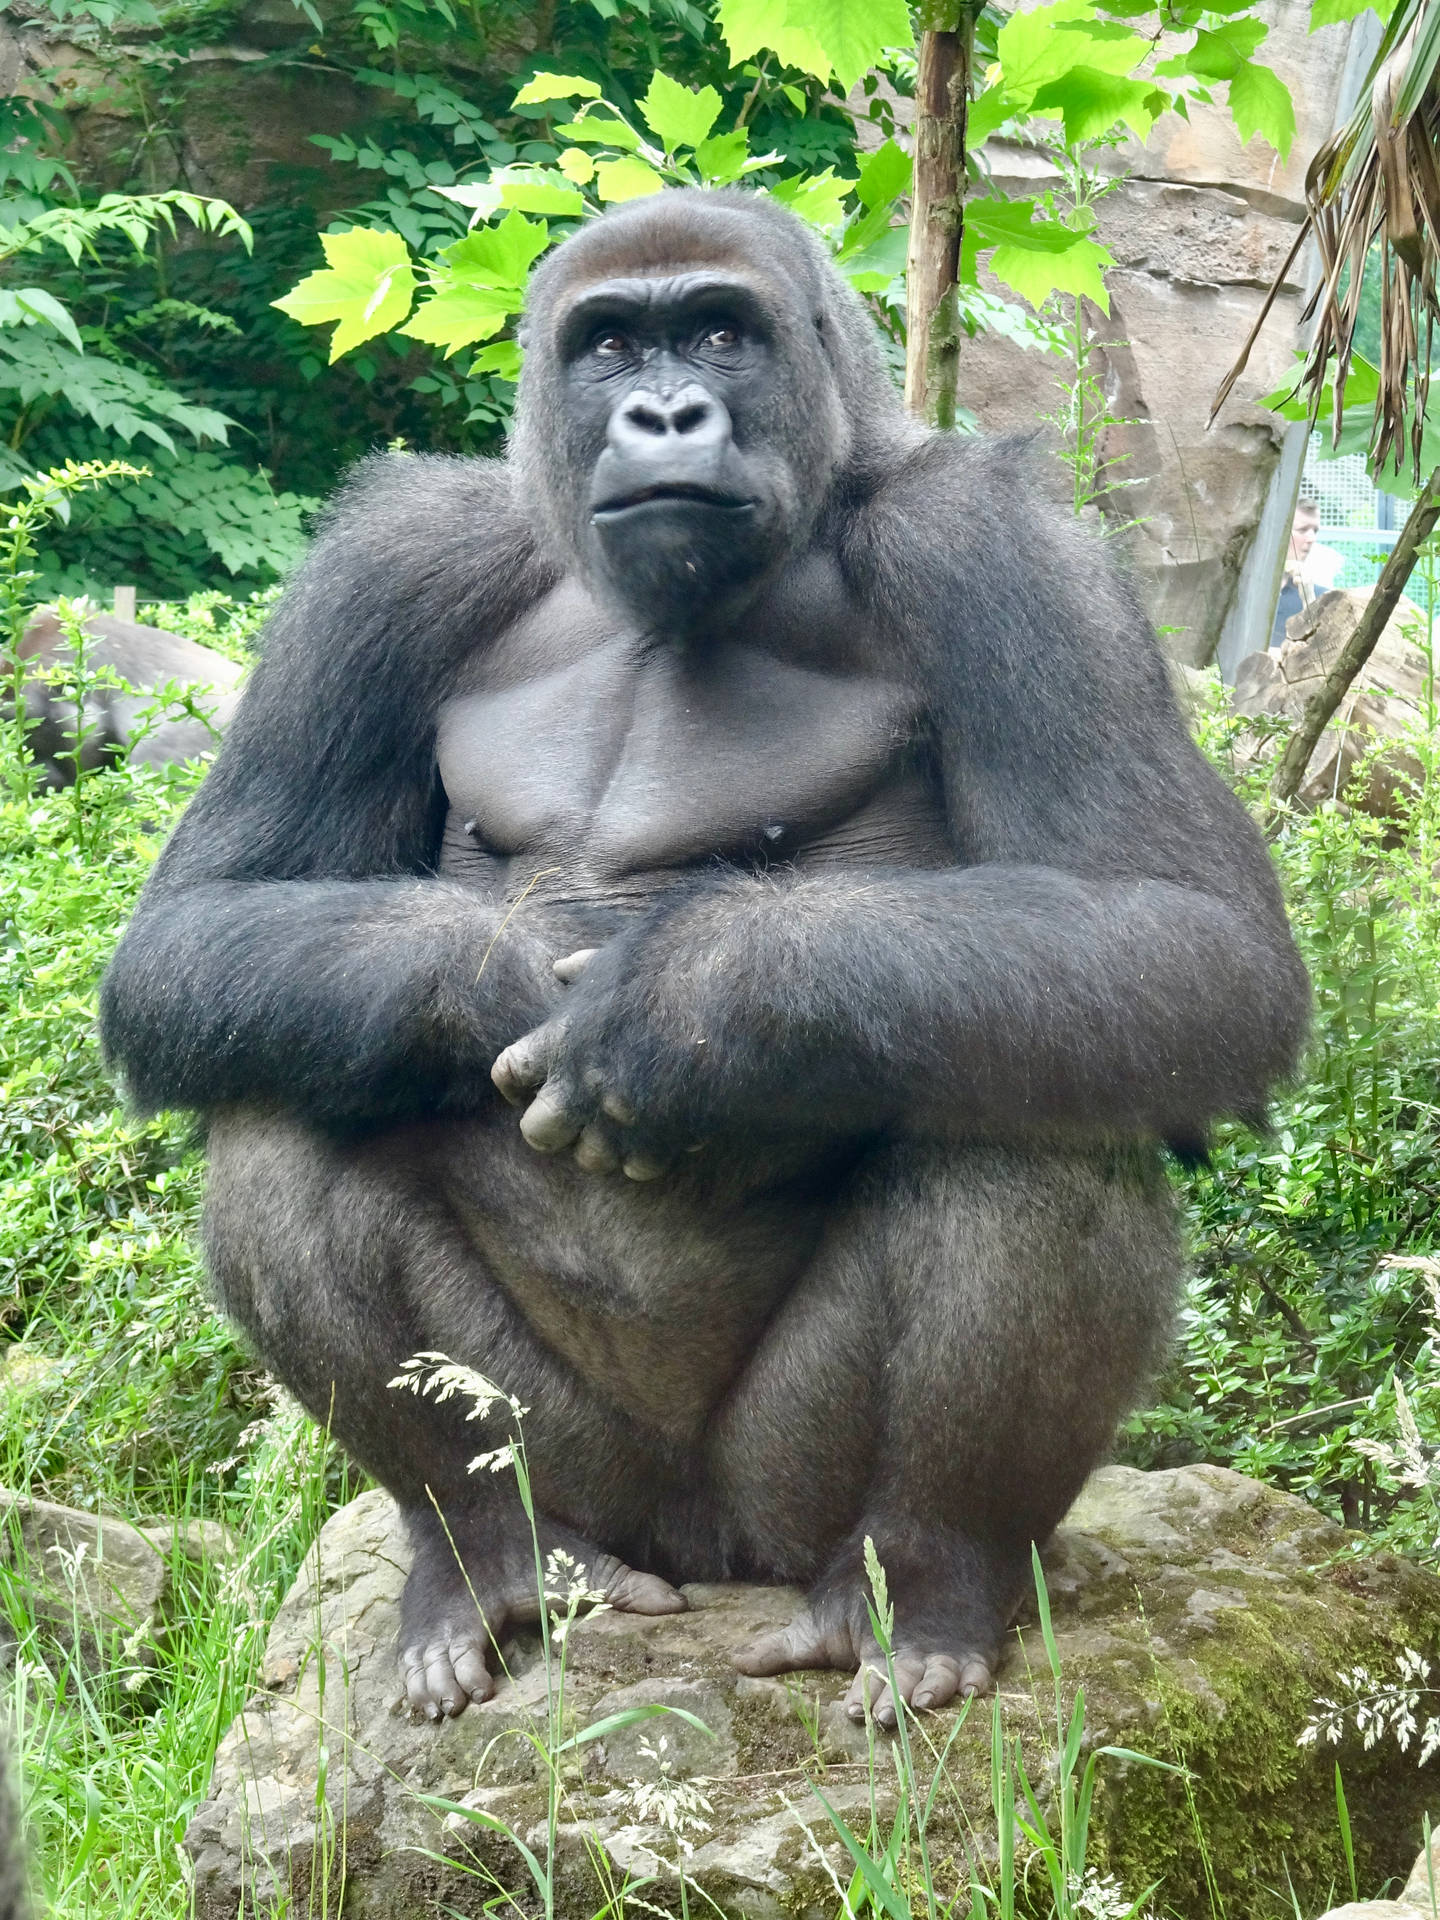 Gorilla 3672X4896 Wallpaper and Background Image